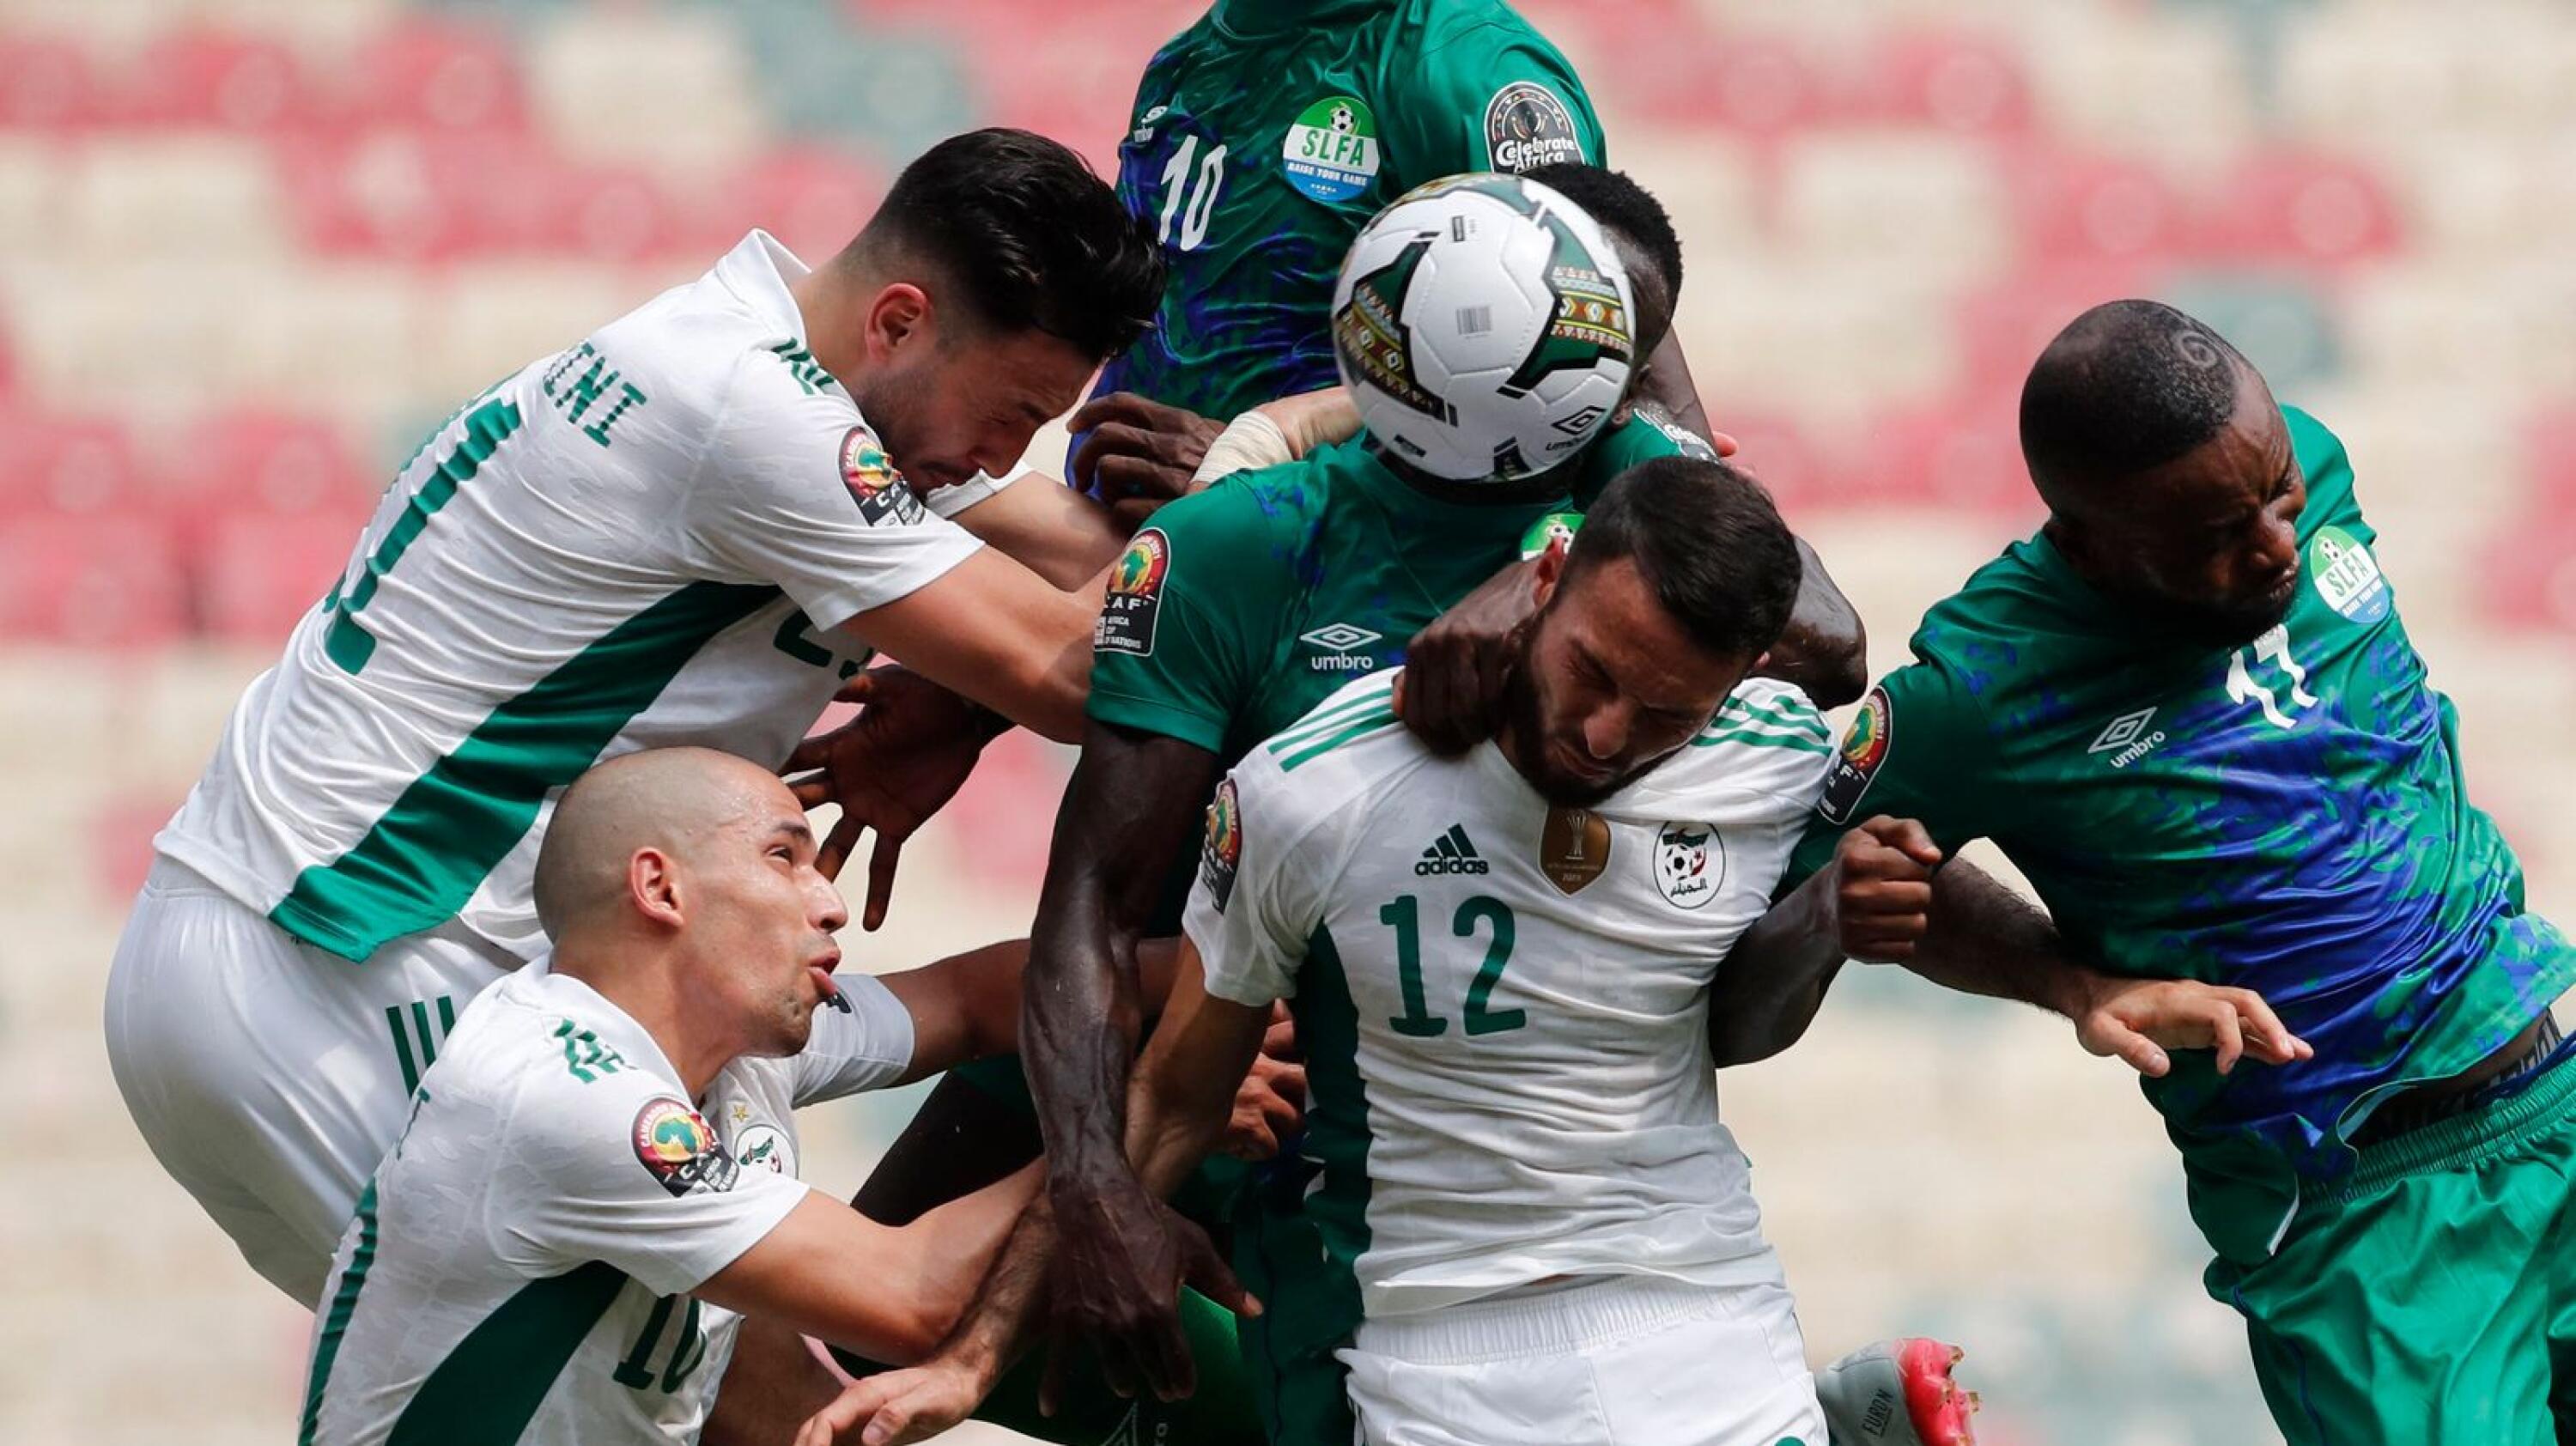 Algeria's and Sierra Leone’s players fight for the ball during their Africa Cup of Nations clash in Douala, Cameroon on Tuesday